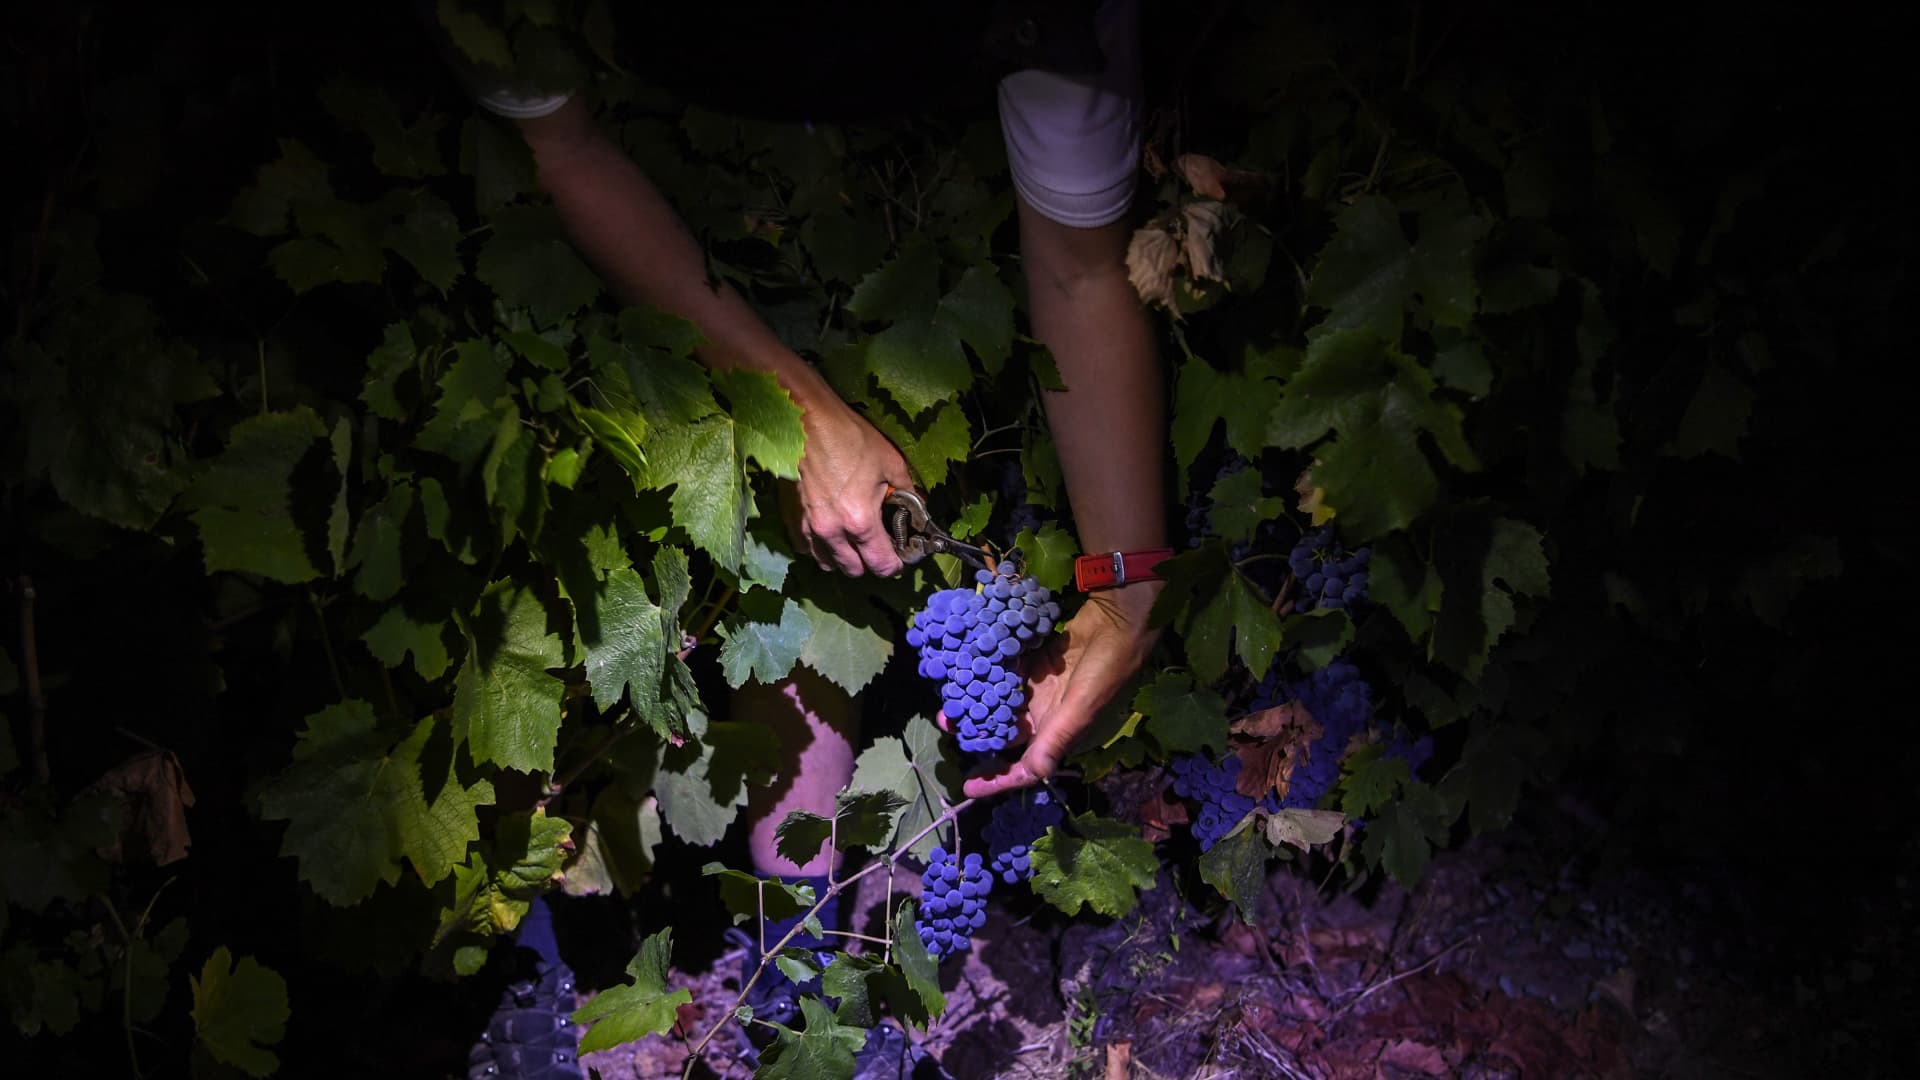 A picker cuts grapes at a vineyard in Beaujolais, eastern France, on early September 3, 2018, during this year's first Beaujolais' harvest.